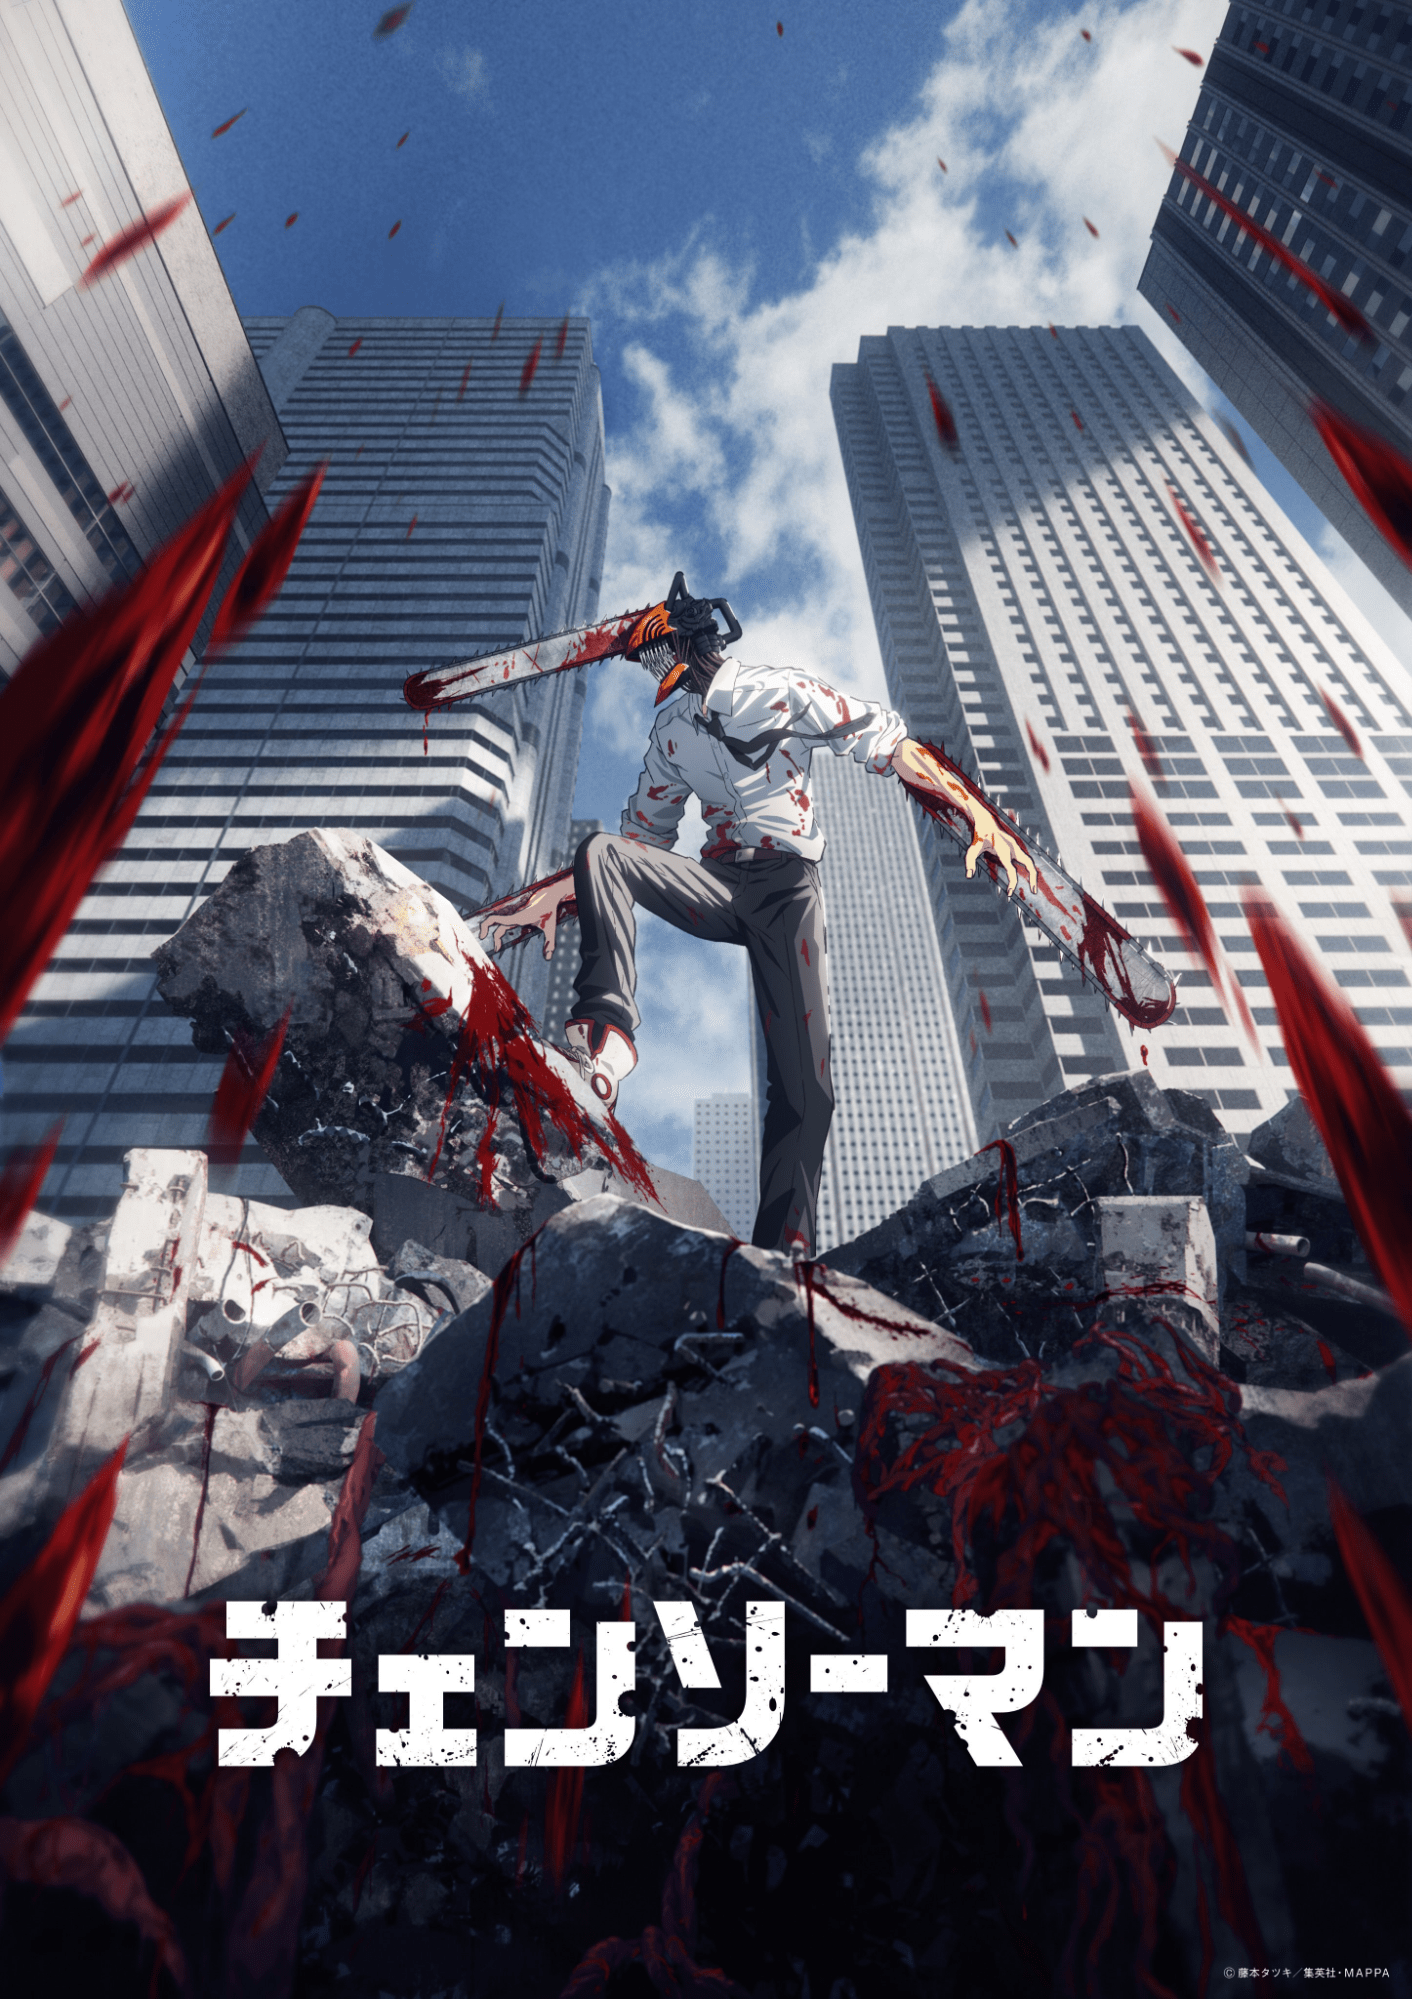 Fall 2022 anime - chainsaw man poster